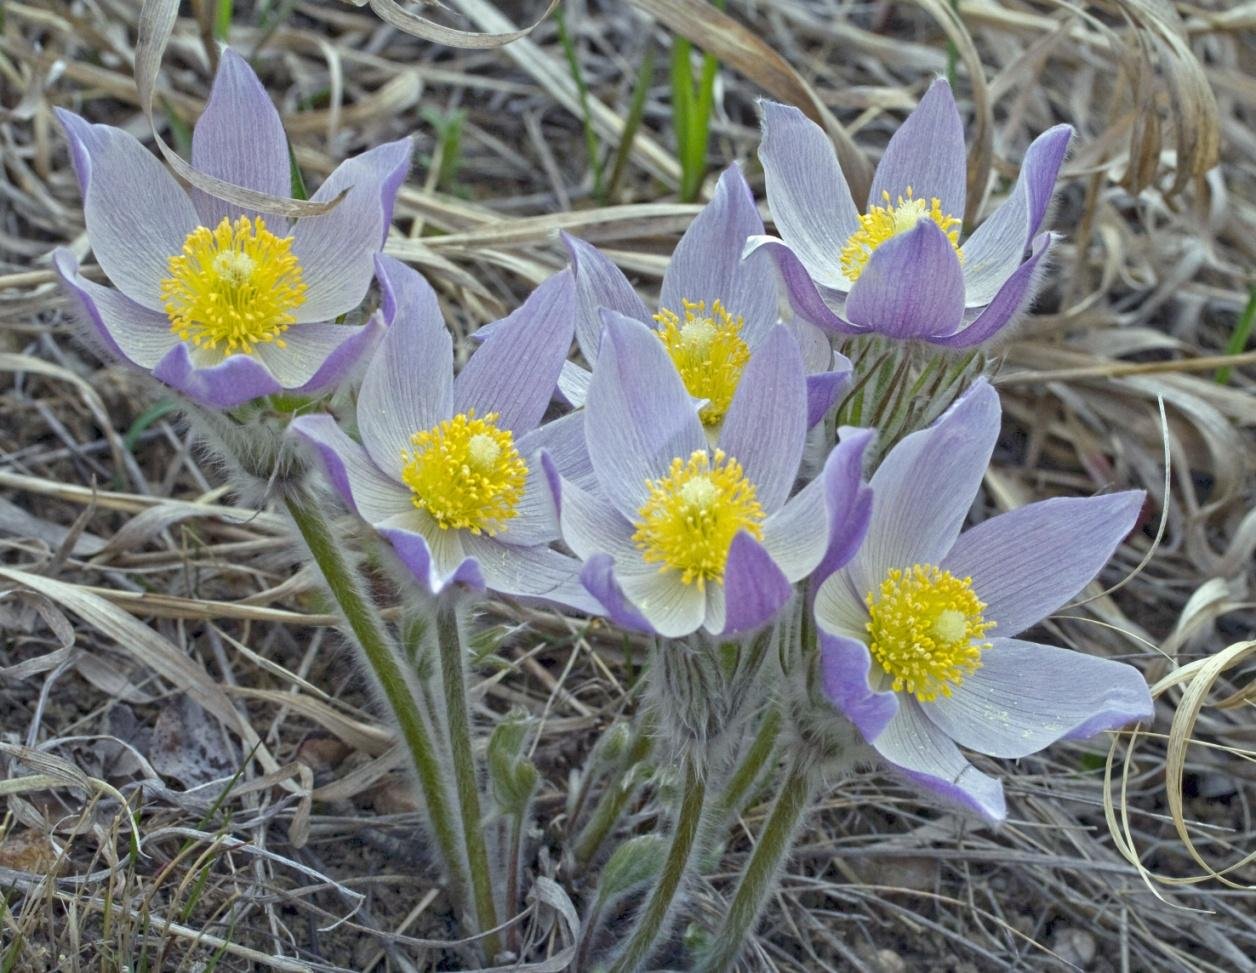 Pasqueflower (Pulsatilla patens) is one of the region's first bloomers in open meadows and woodlands.